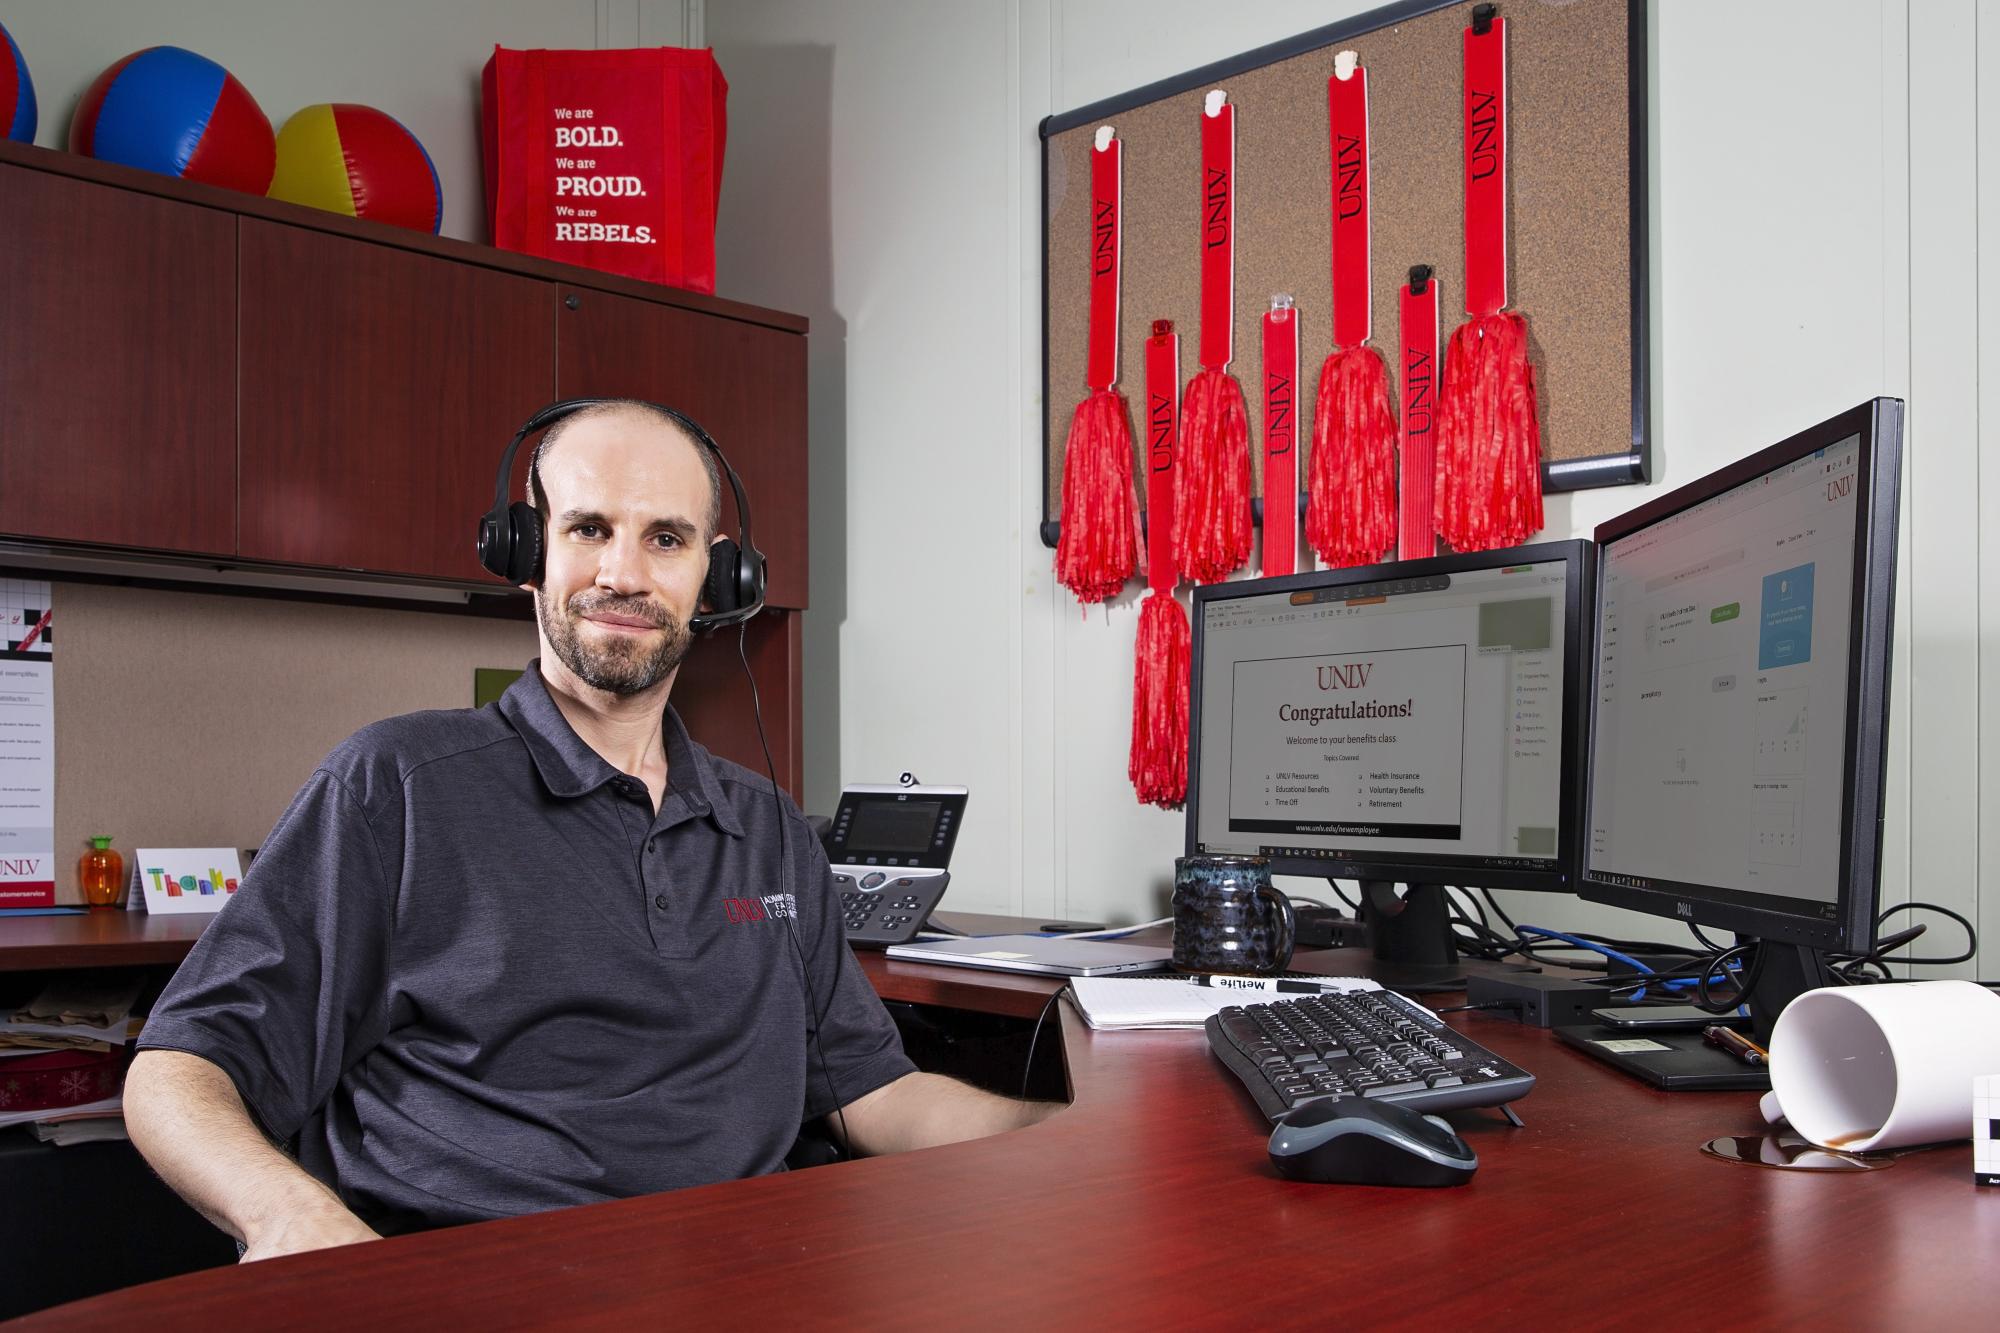 A person wearing headphones poses at their work station.